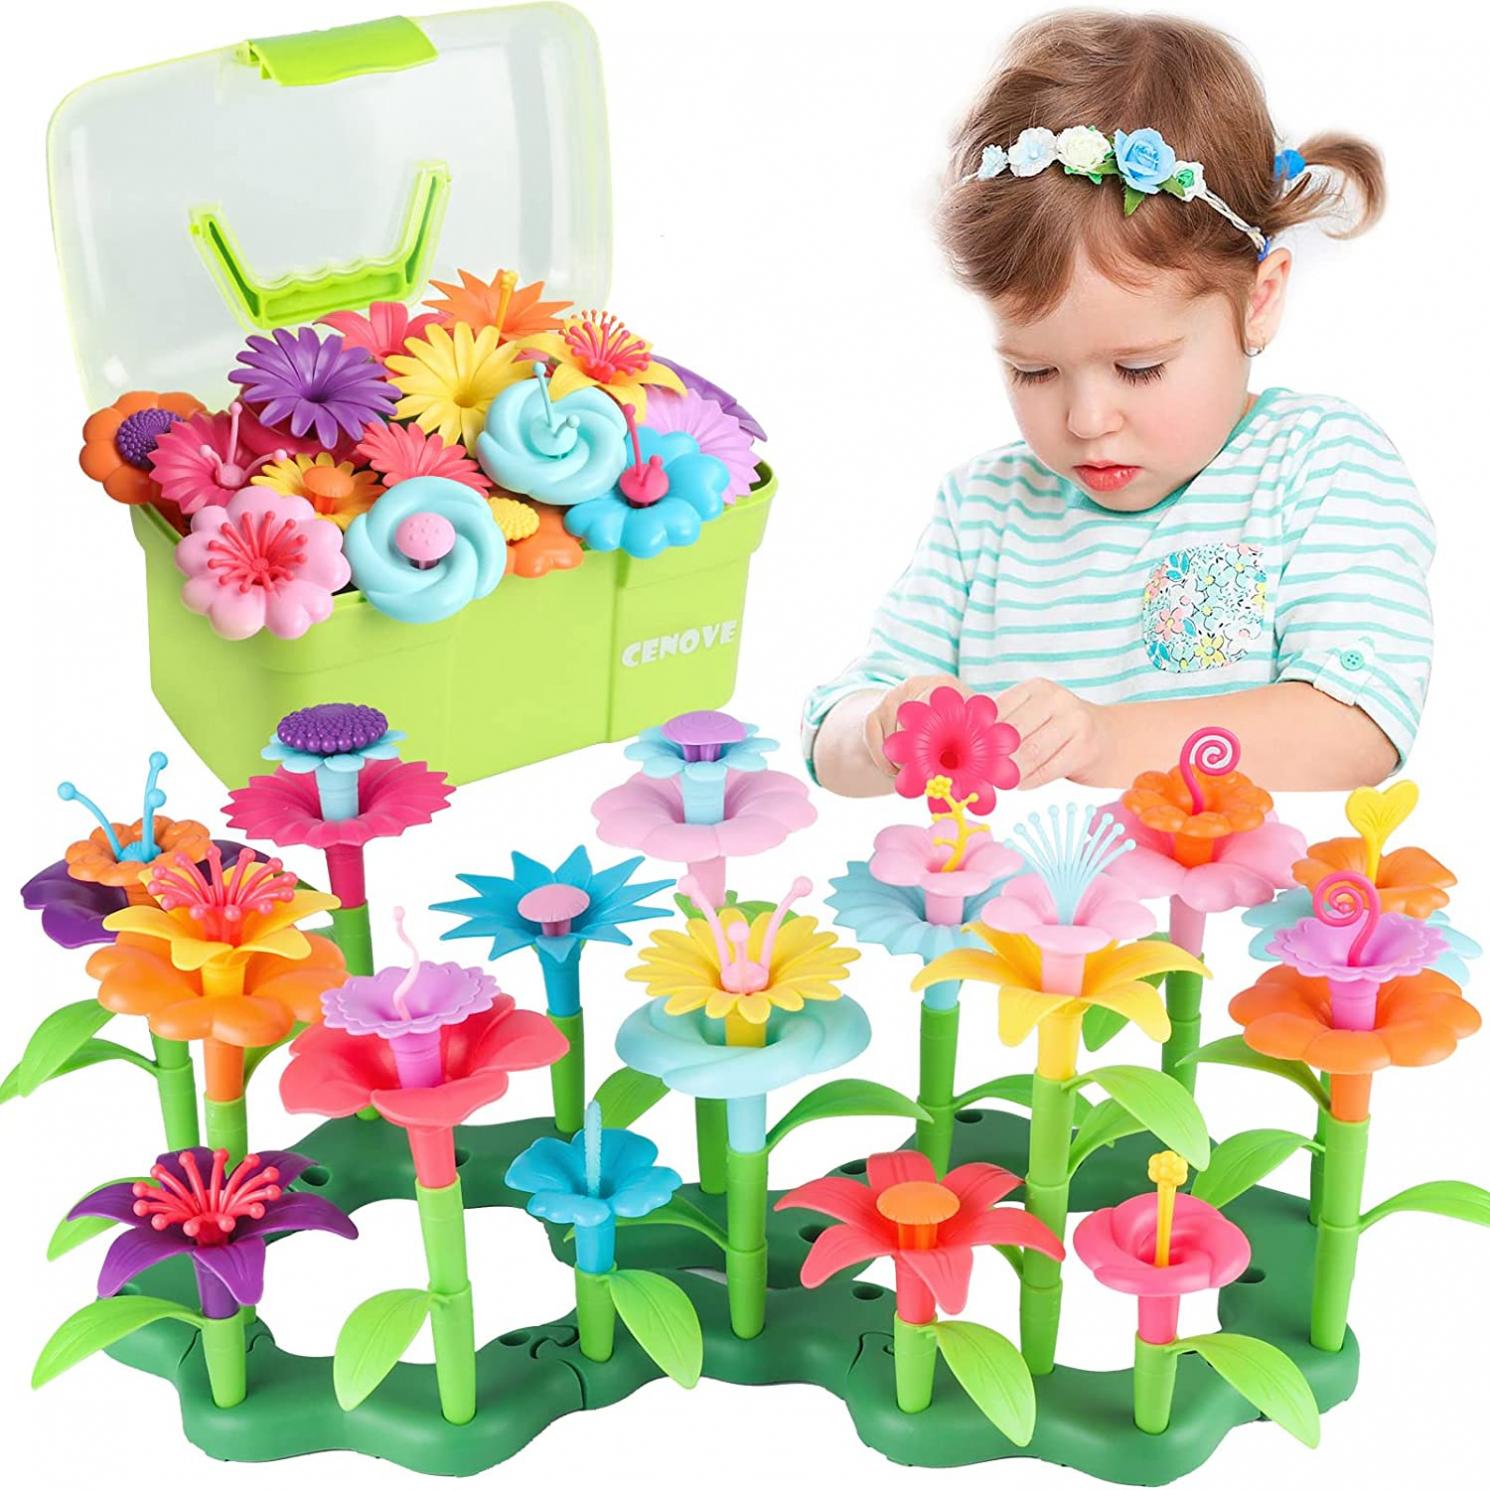 CENOVE Toddler Toys Gifts for 3 4 5 6 7 Year Old Girls Boys,Flower Garden Building Toy STEM Educational Activity Preschool Toys for Kids Age 3-6(130 Pcs)